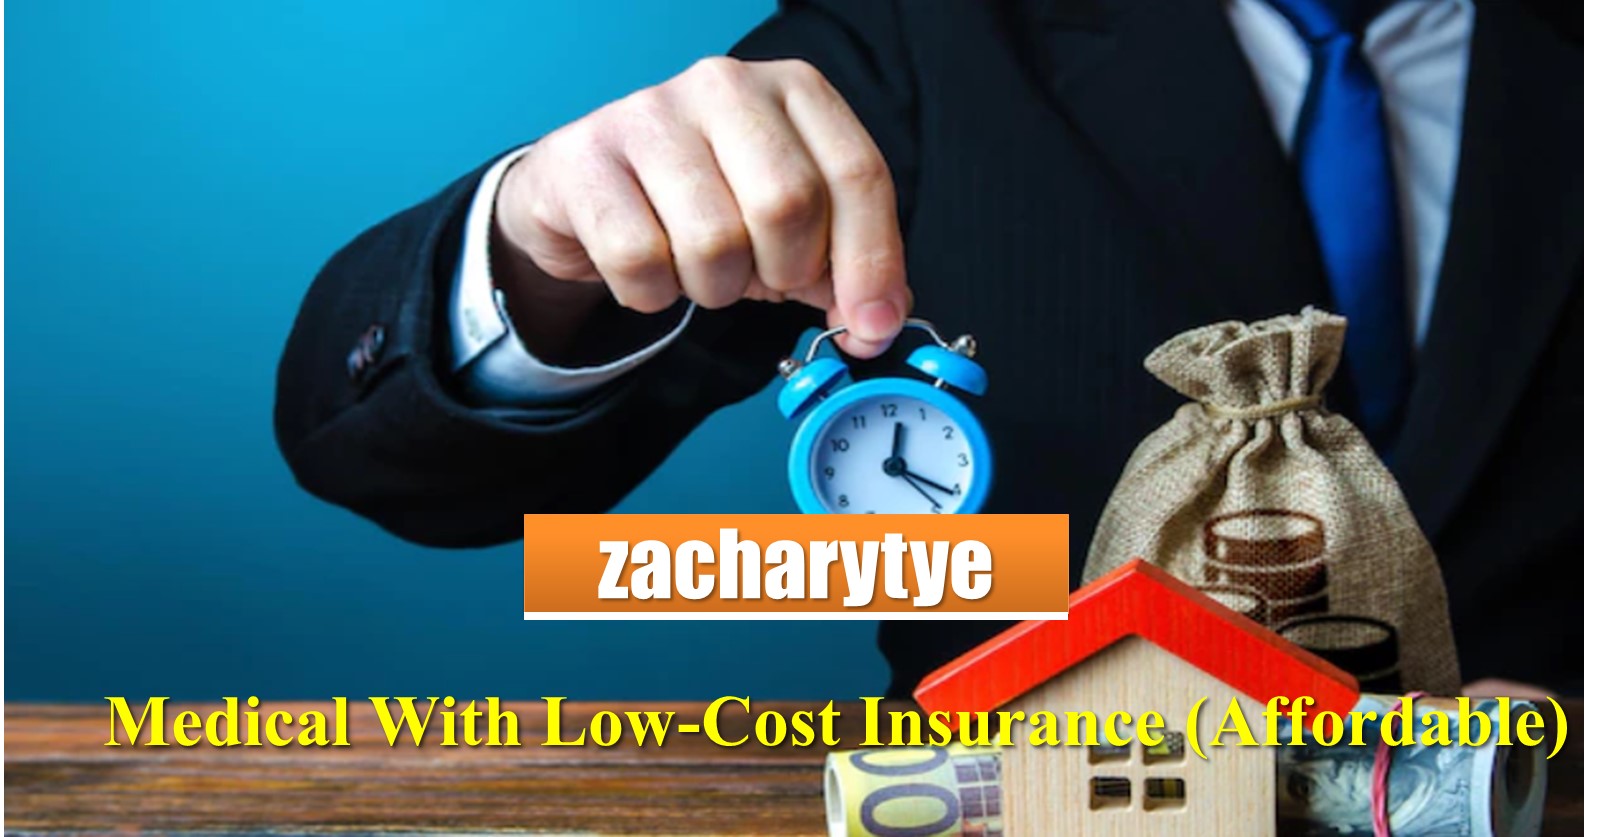 Medical With Low-Cost Insurance (Affordable)